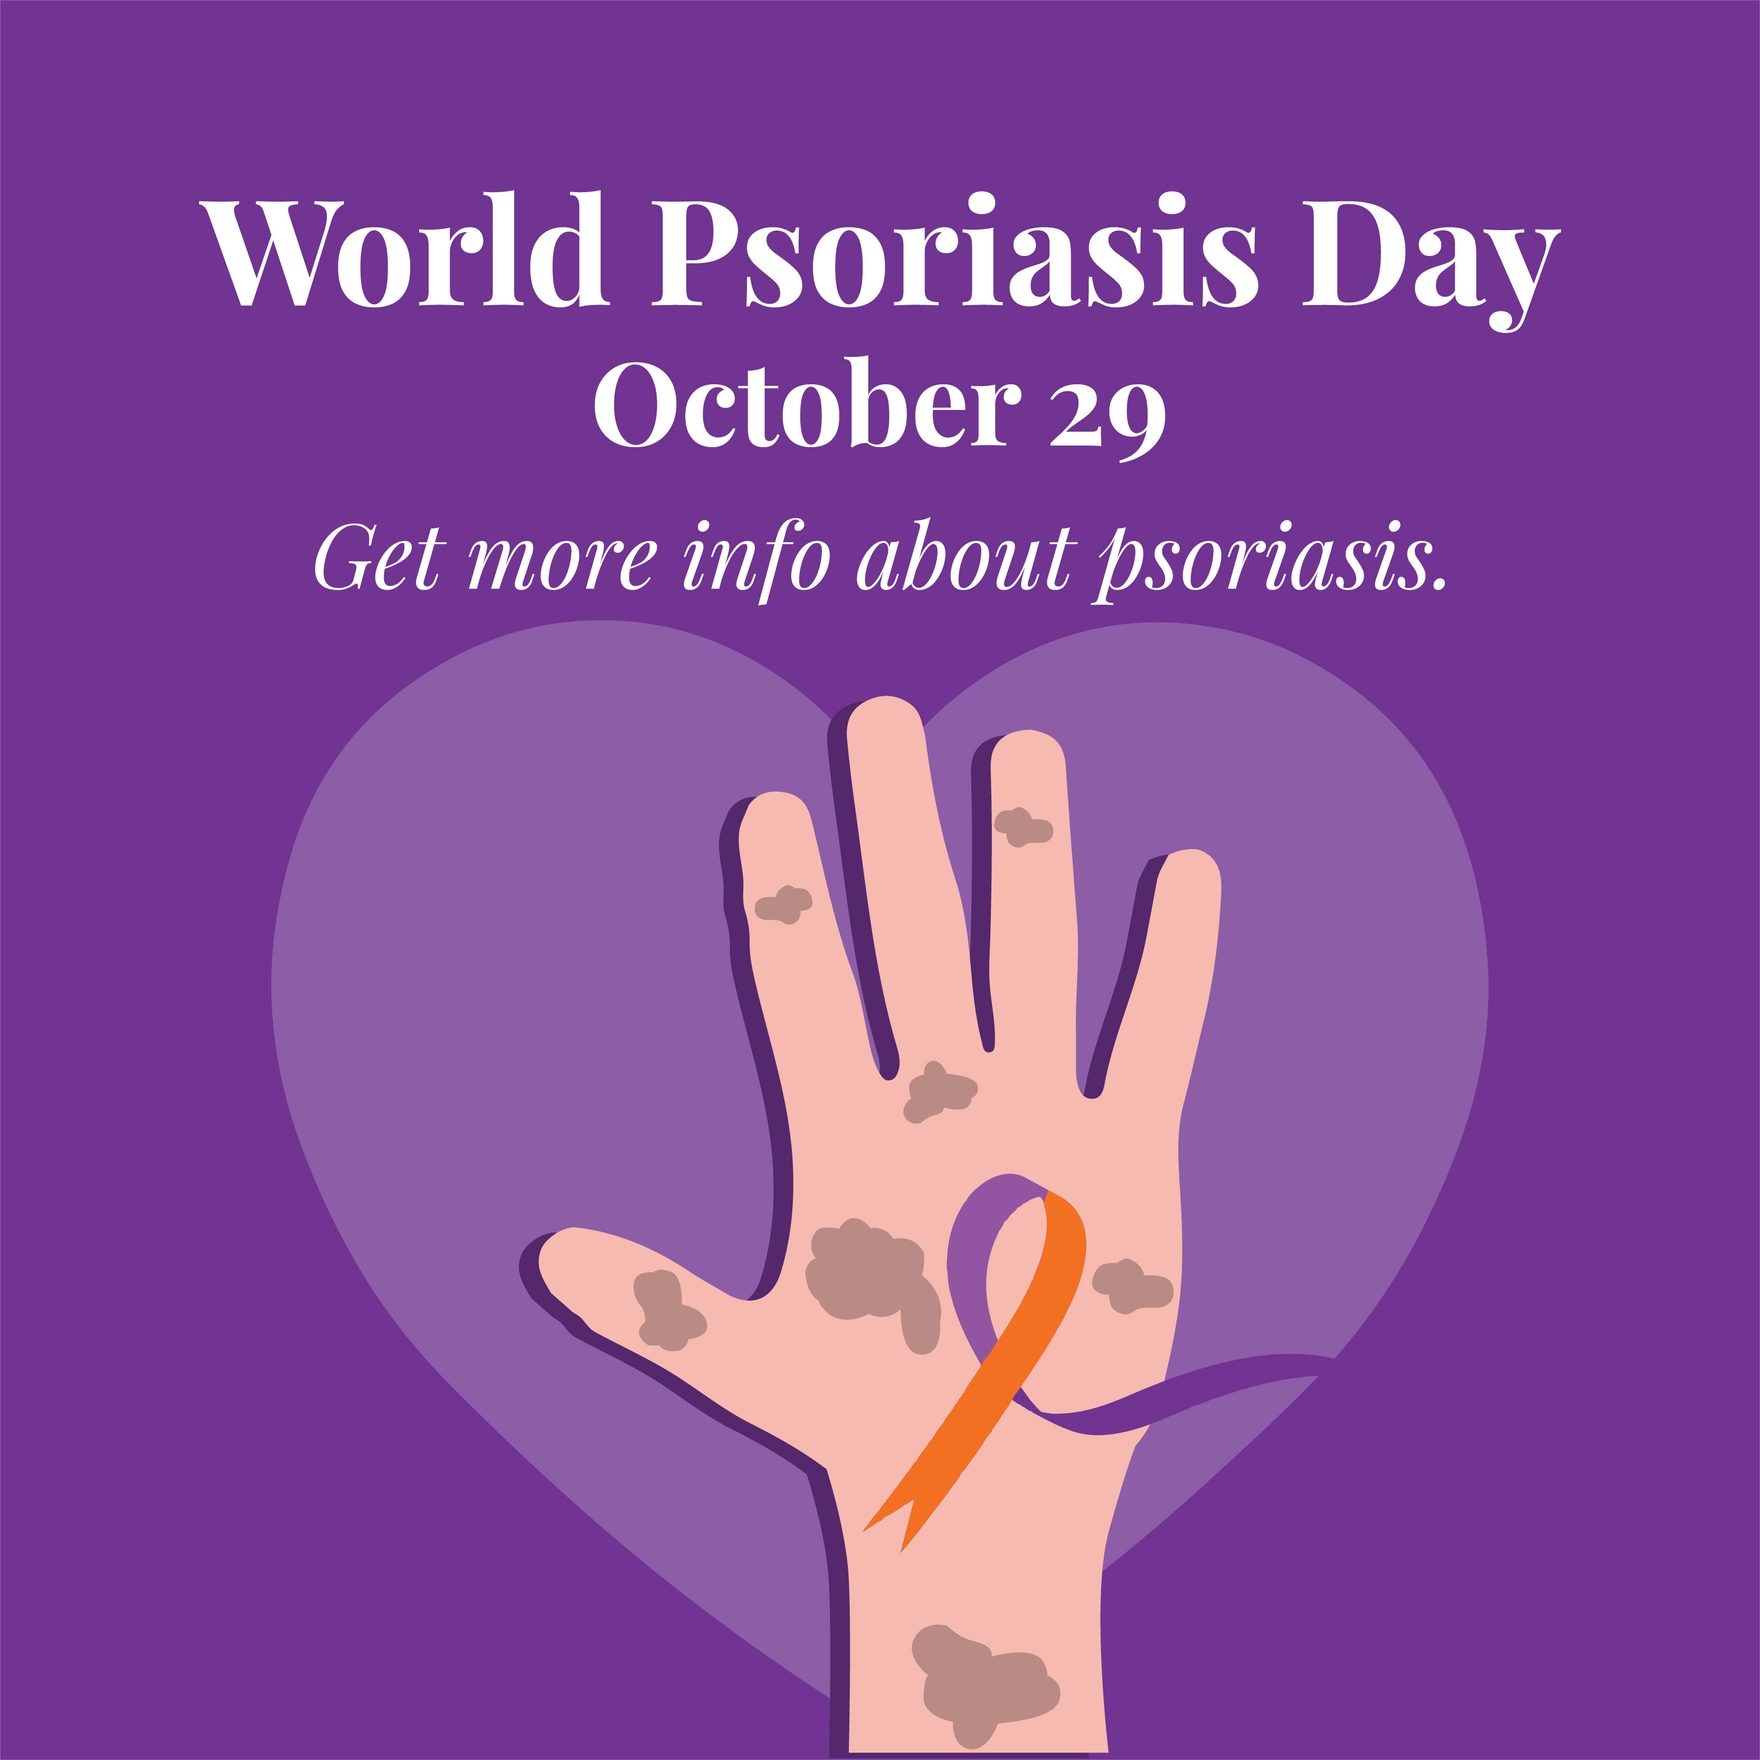 World Psoriasis Day WhatsApp Post in Illustrator, PSD, EPS, SVG, JPG, PNG